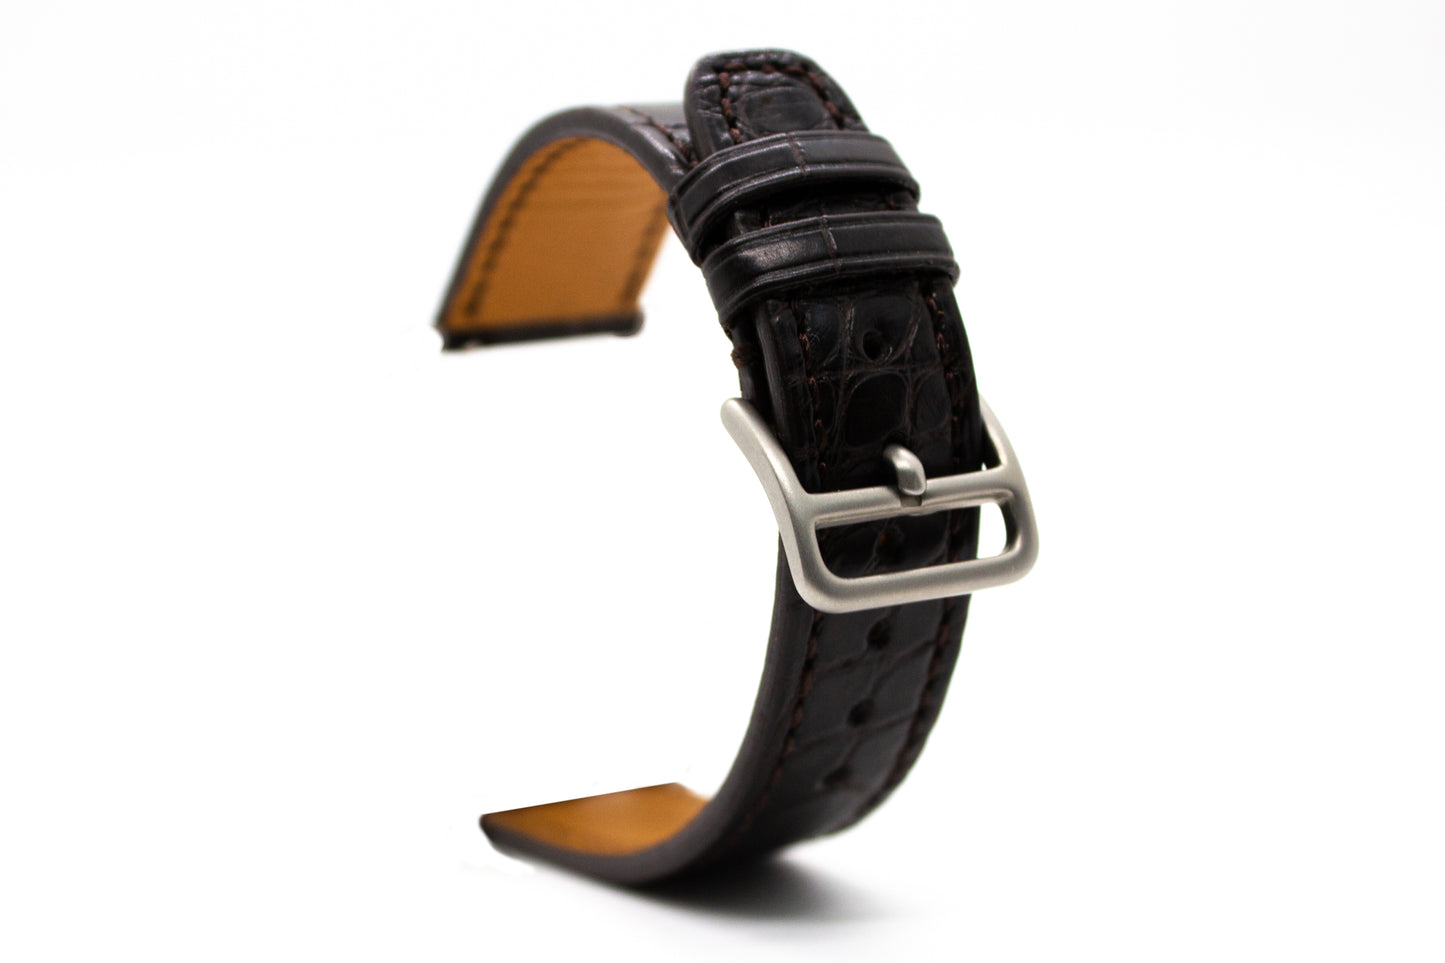 The Parsonage Watch Strap in Brown